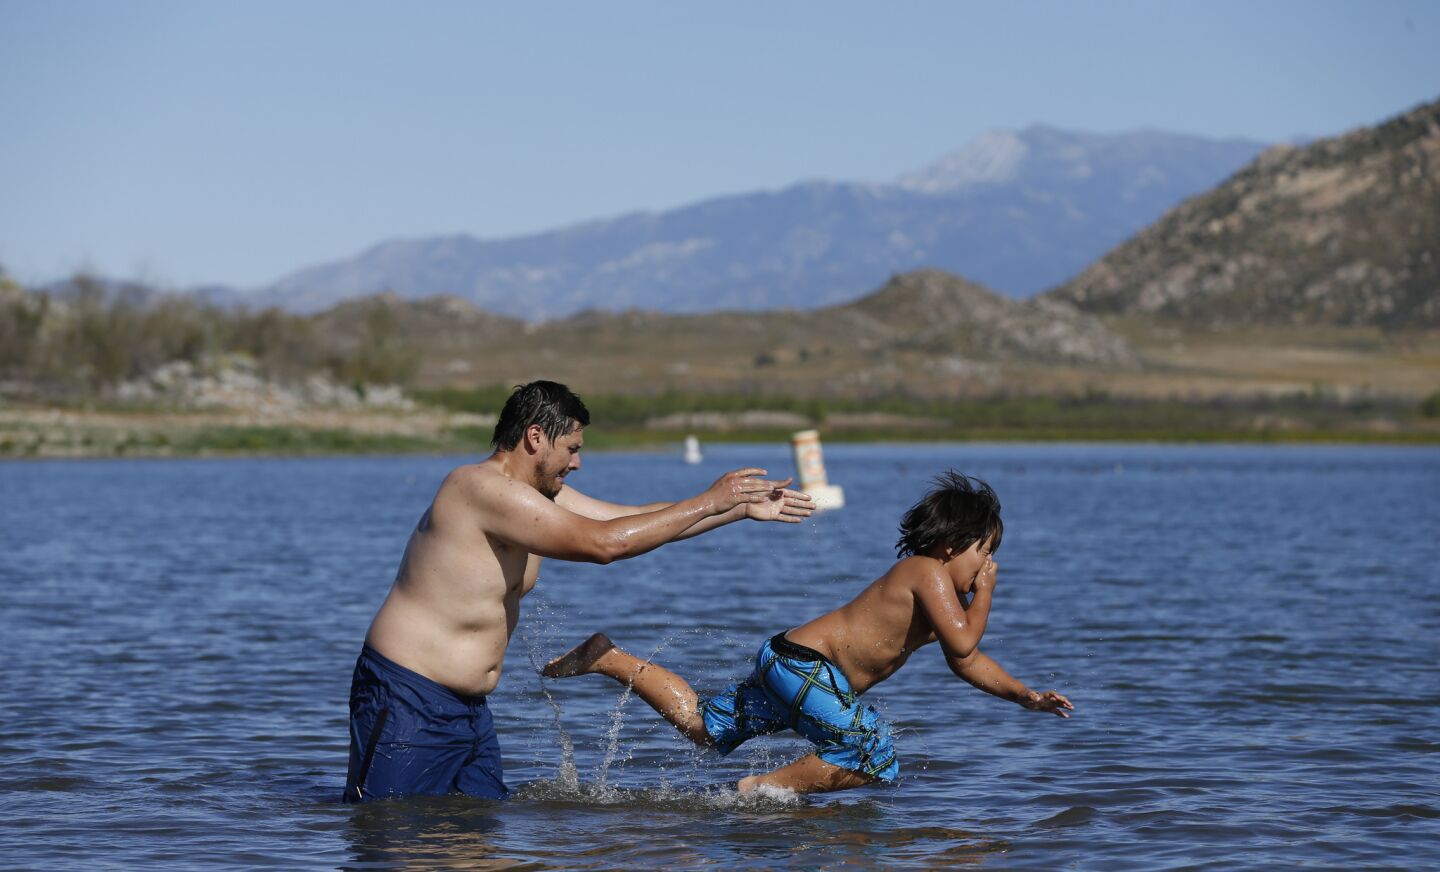 Abe Quirarte tosses his son, Abe Jr., 8, of San Gabriel, as they cool off at Lake Perris in Riverside County amid high temperatures Thursday.